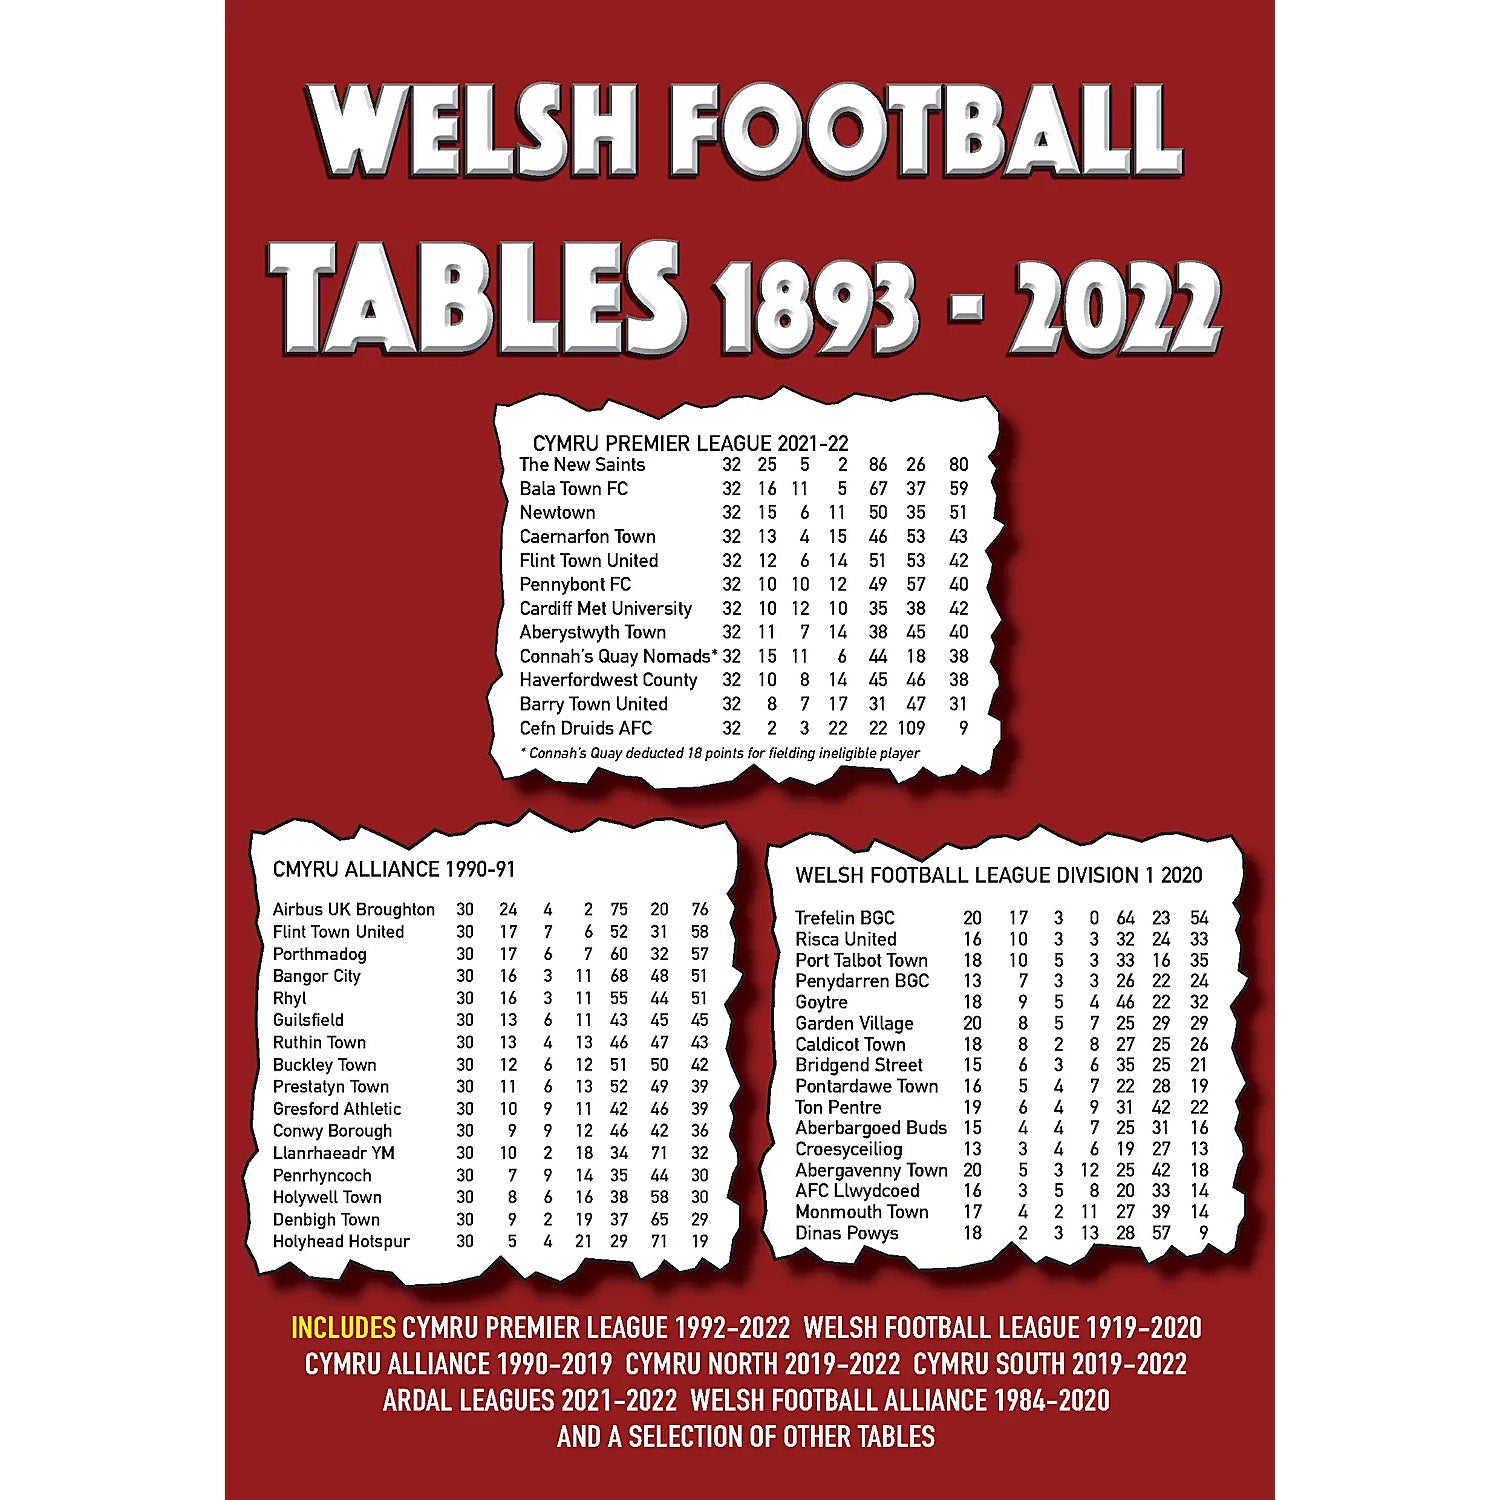 Welsh Football Tables 1893-2022